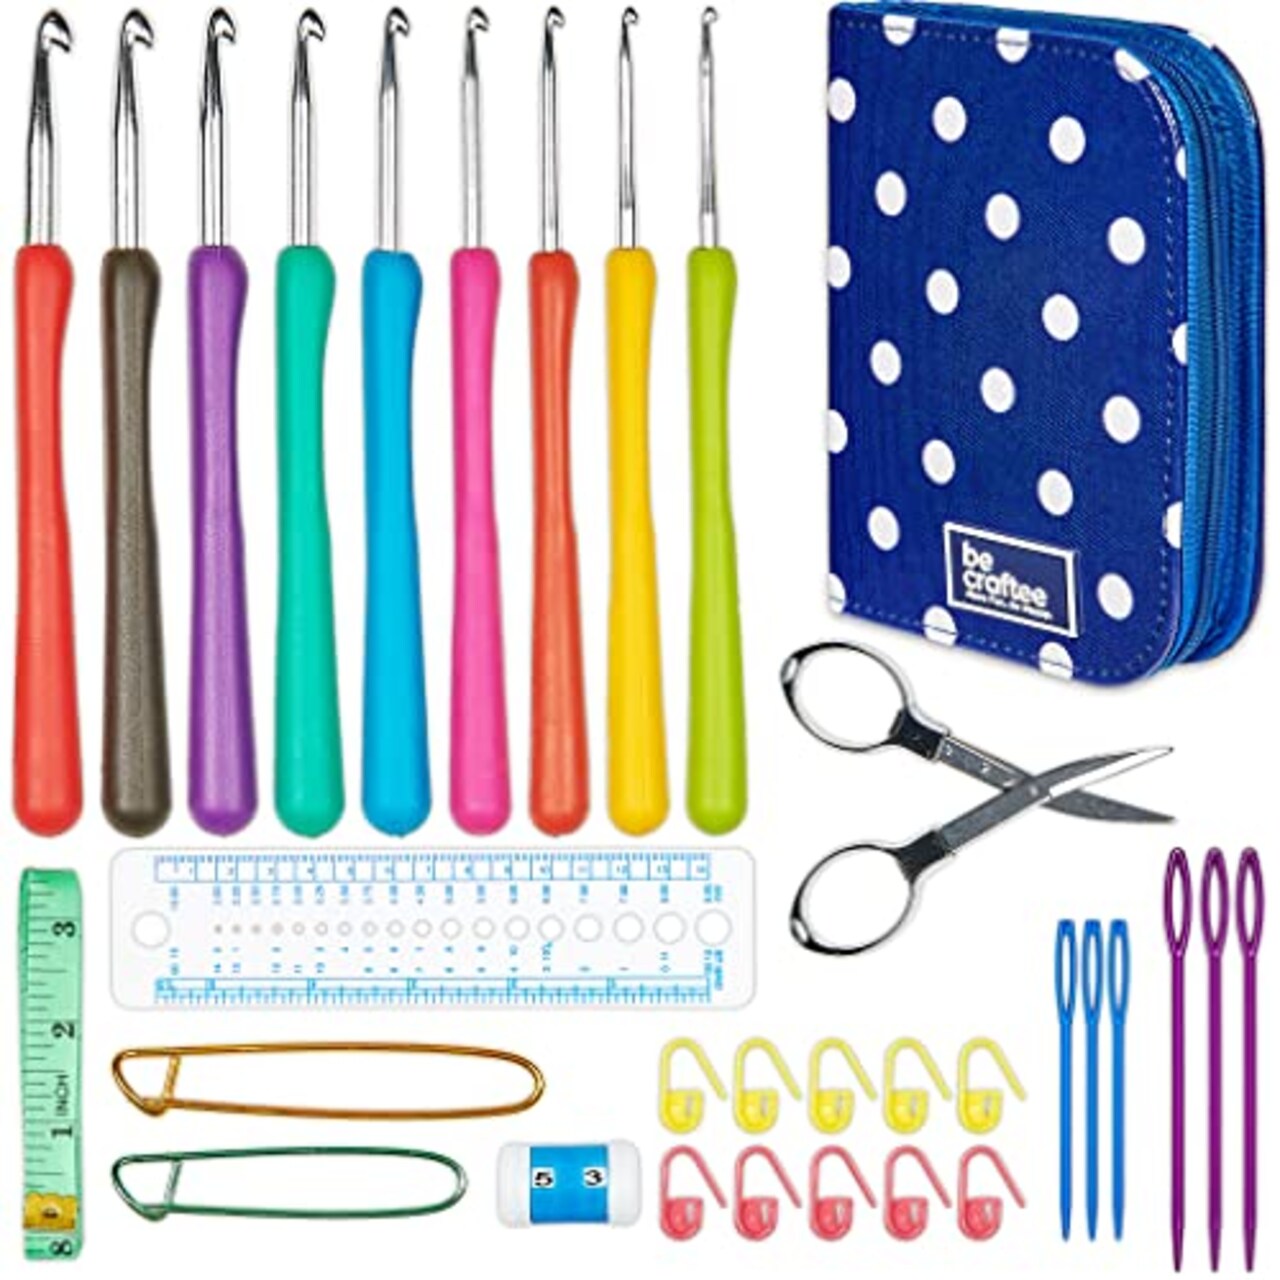 BeCraftee Crochet Hooks Kit - 31 Piece Set with 9 Ergonomic Hook Sizes, 6  Yarn Needles, Additional Knitting & Crochet Supplies and Carrying Case﻿